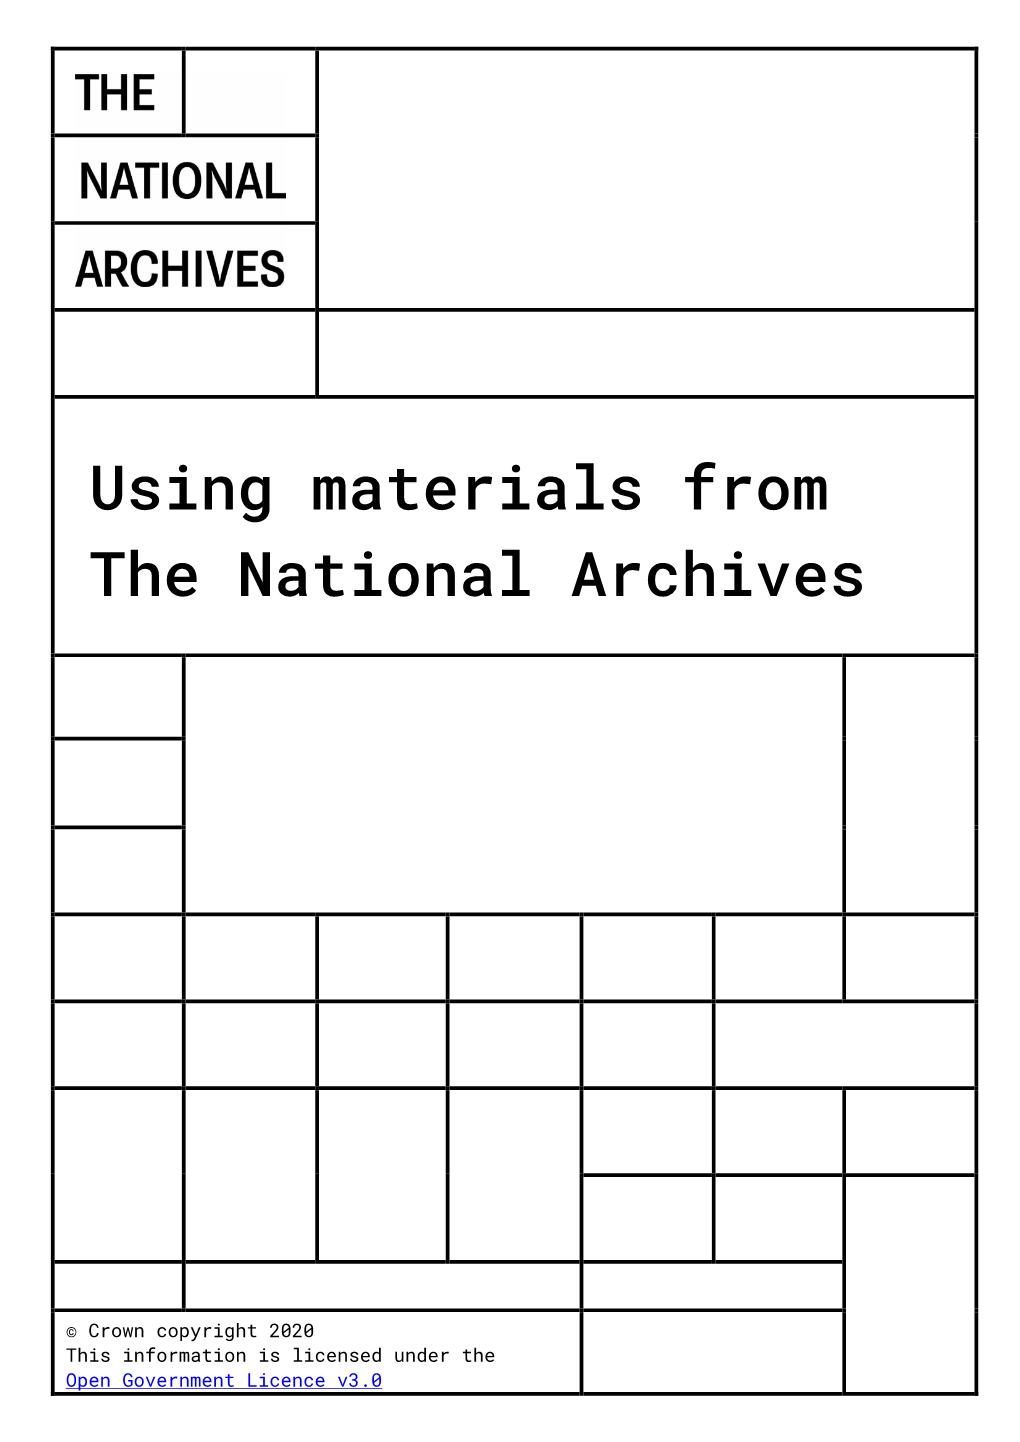 Using Materials from the National Archives